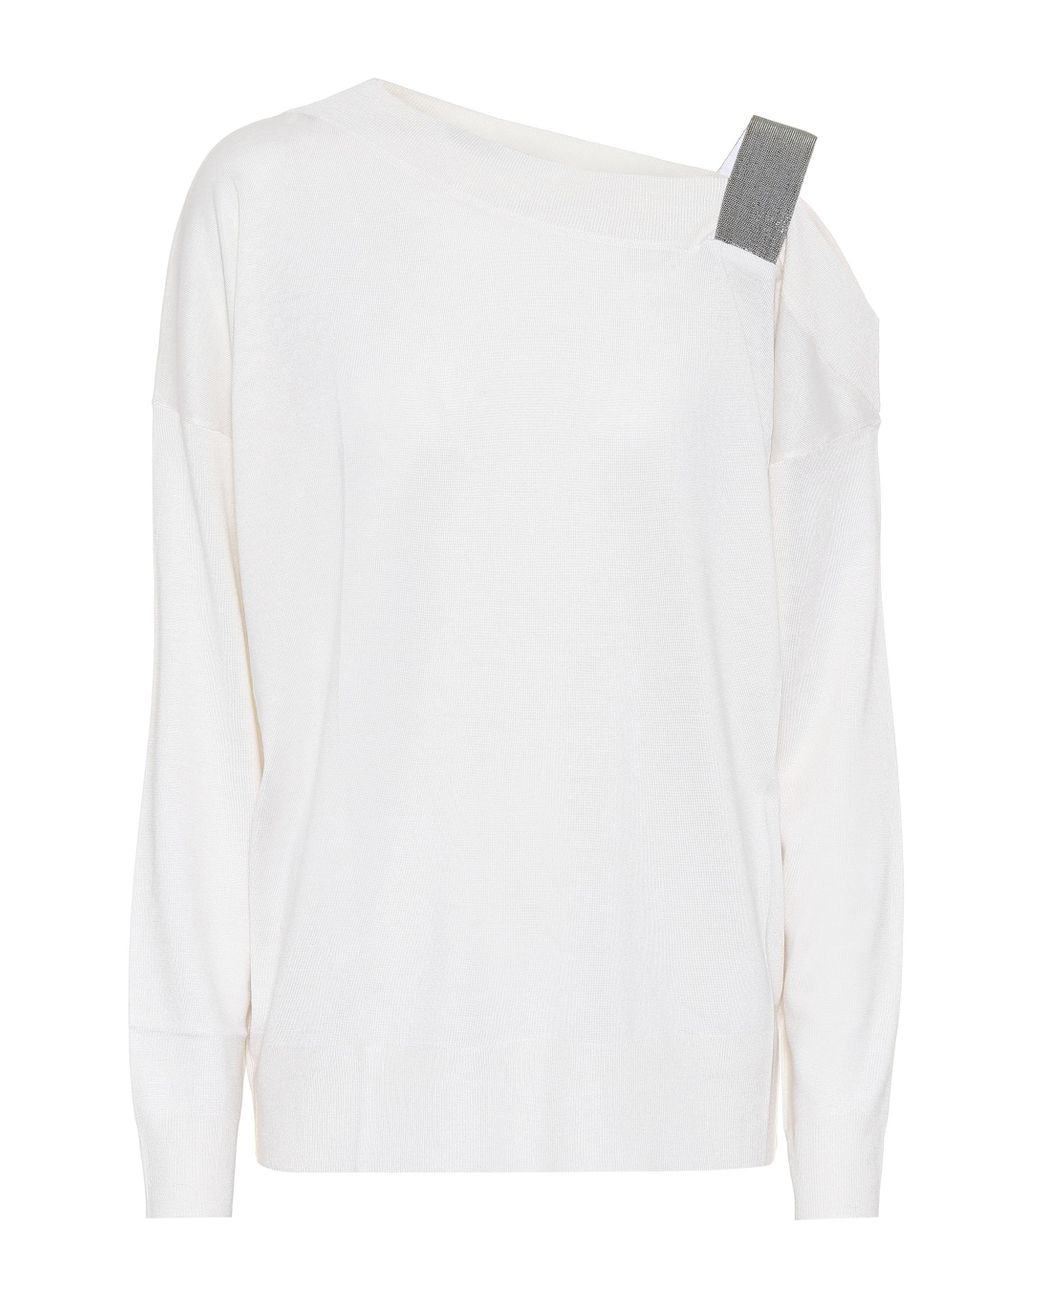 Brunello Cucinelli Embellished Cashmere And Silk Sweater in White - Lyst